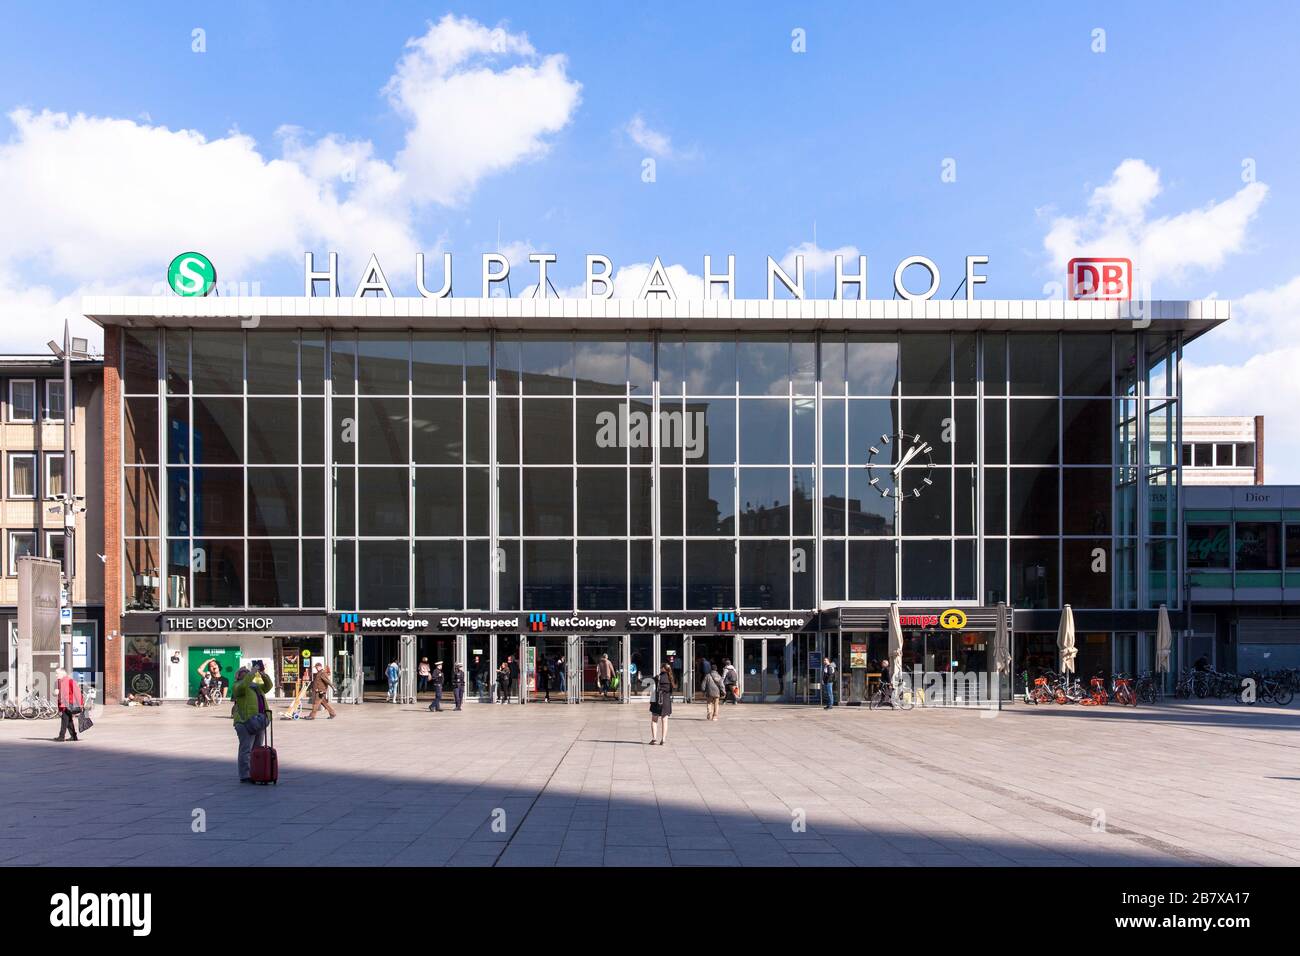 Coronavirus / Covid 19 outbreak, March18th. 2020. Only few people infront of the main station, Cologne, Germany.  Coronavirus / Covid 19 Krise, 18. Ma Stock Photo